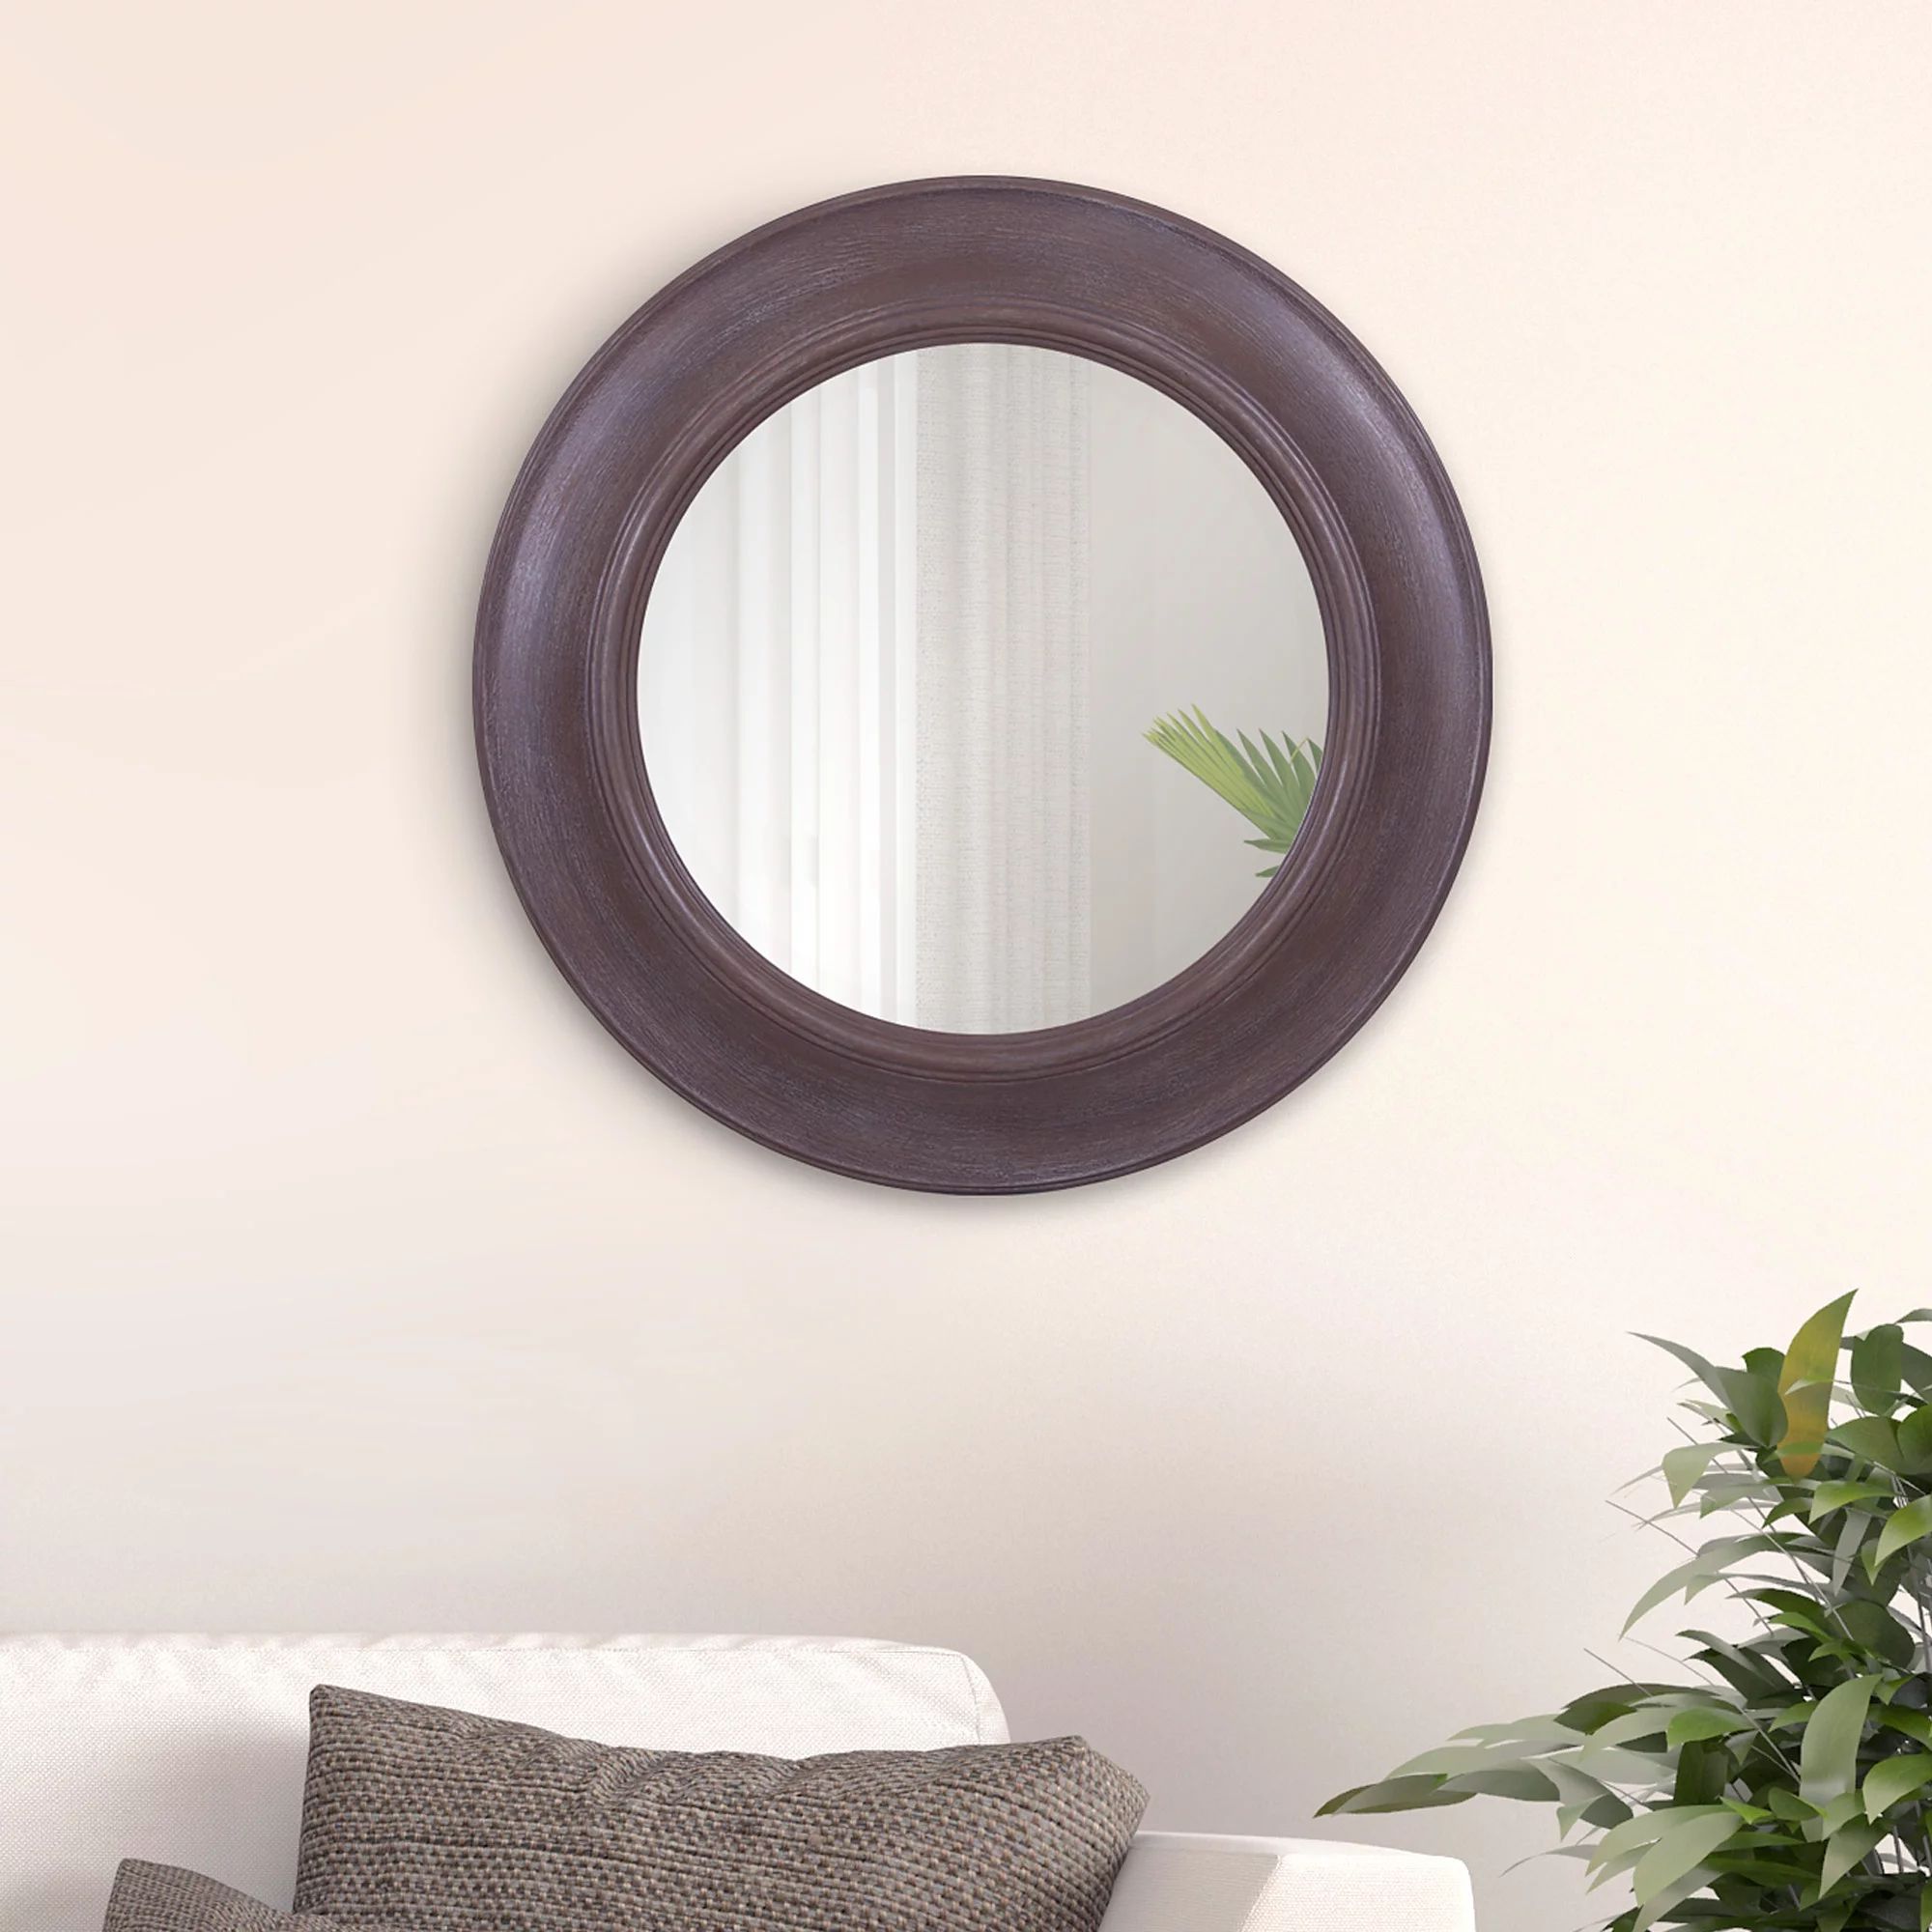 Rustic Round Mirror In Distressed Taupe 24"X24"Patton Wall Decor Regarding Distressed Black Round Wall Mirrors (View 2 of 15)